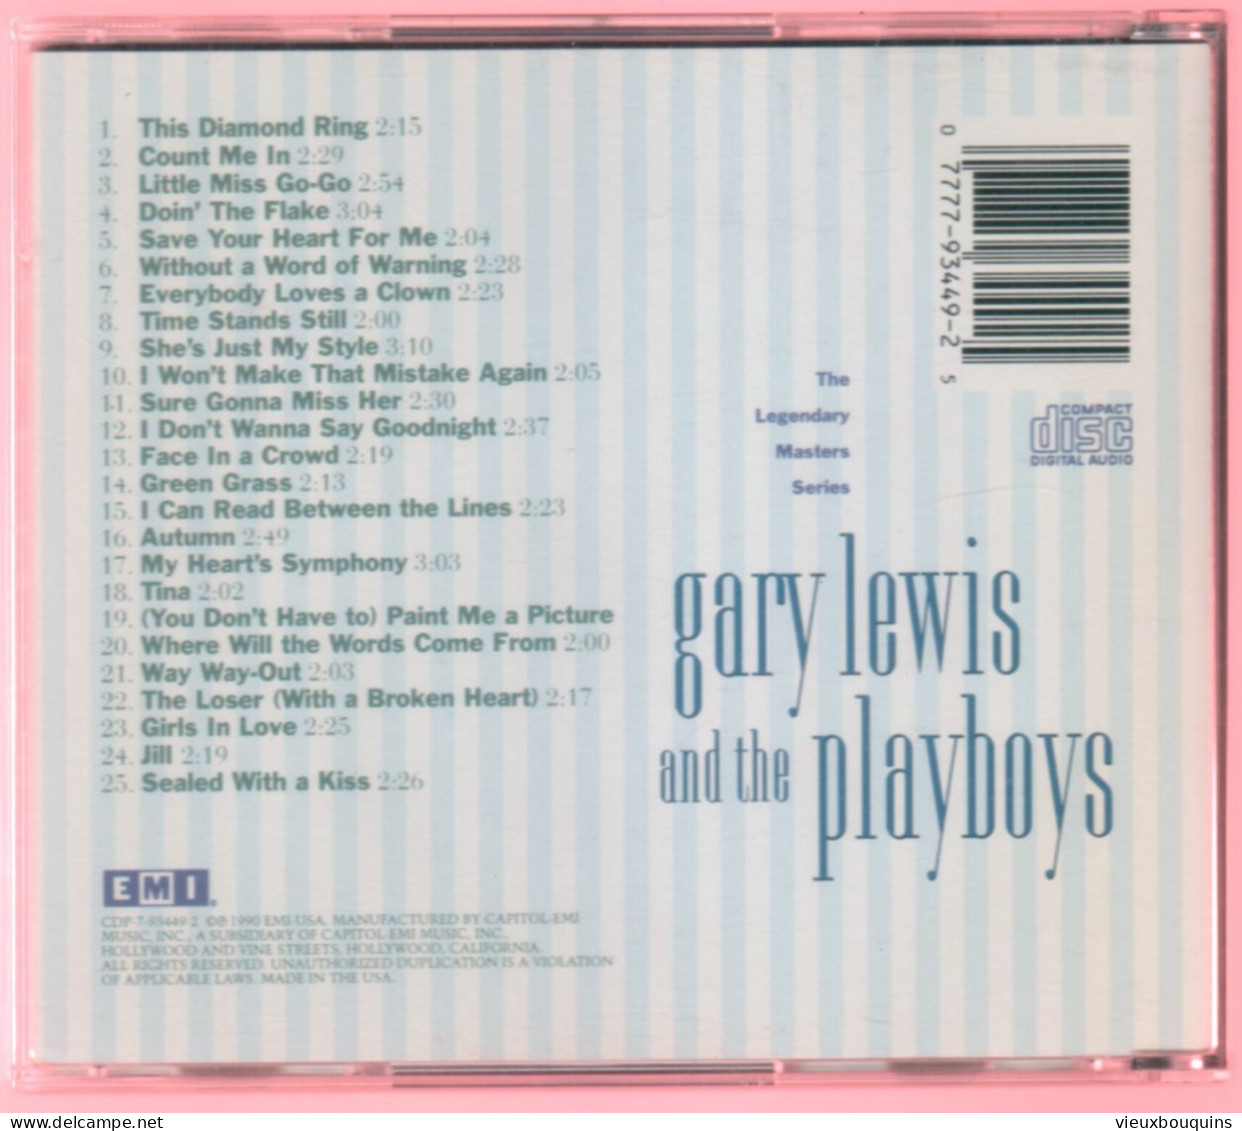 GARY LEWIS AND THE PLAYBOYS (Legendary Masters Series) - Andere - Engelstalig